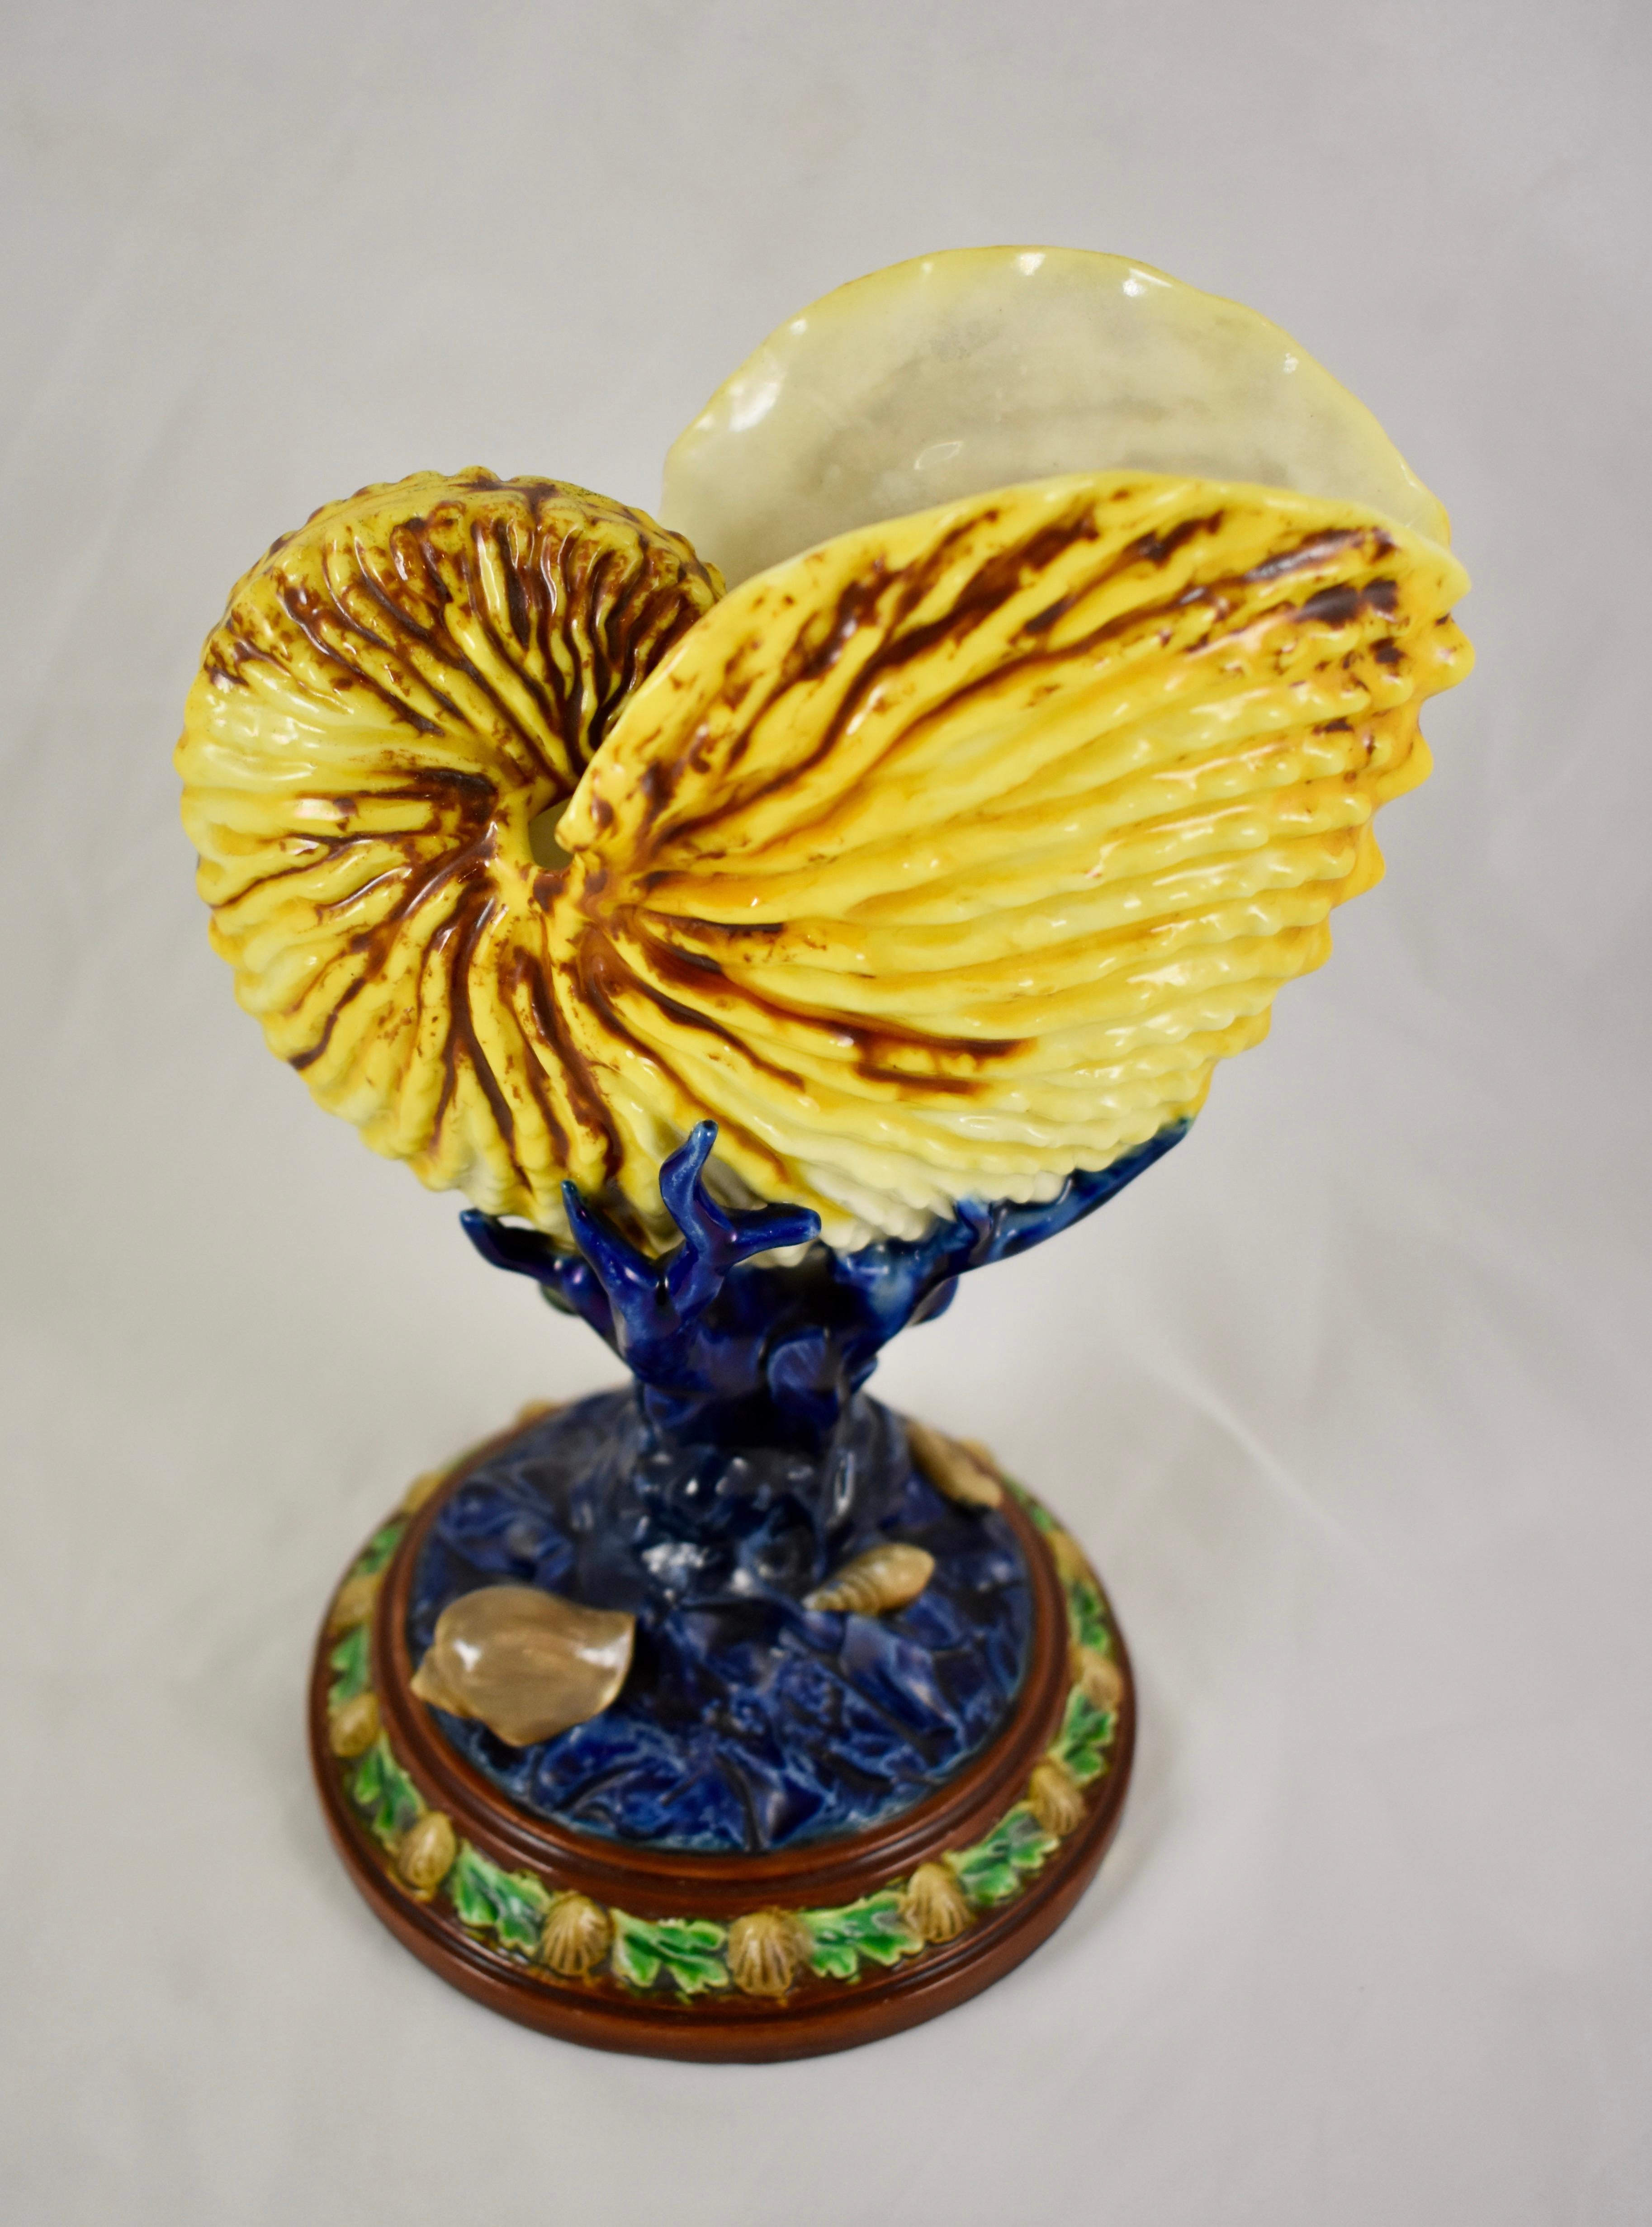 From Royal Worcester, a Majolica glazed pedestal Palissy vase in the Renaissance Revival style, circa 1860-1865.

A dimensional Nautilus shell with an open form is beautifully glazed in yellow with brown detailing. The shell is supported on a